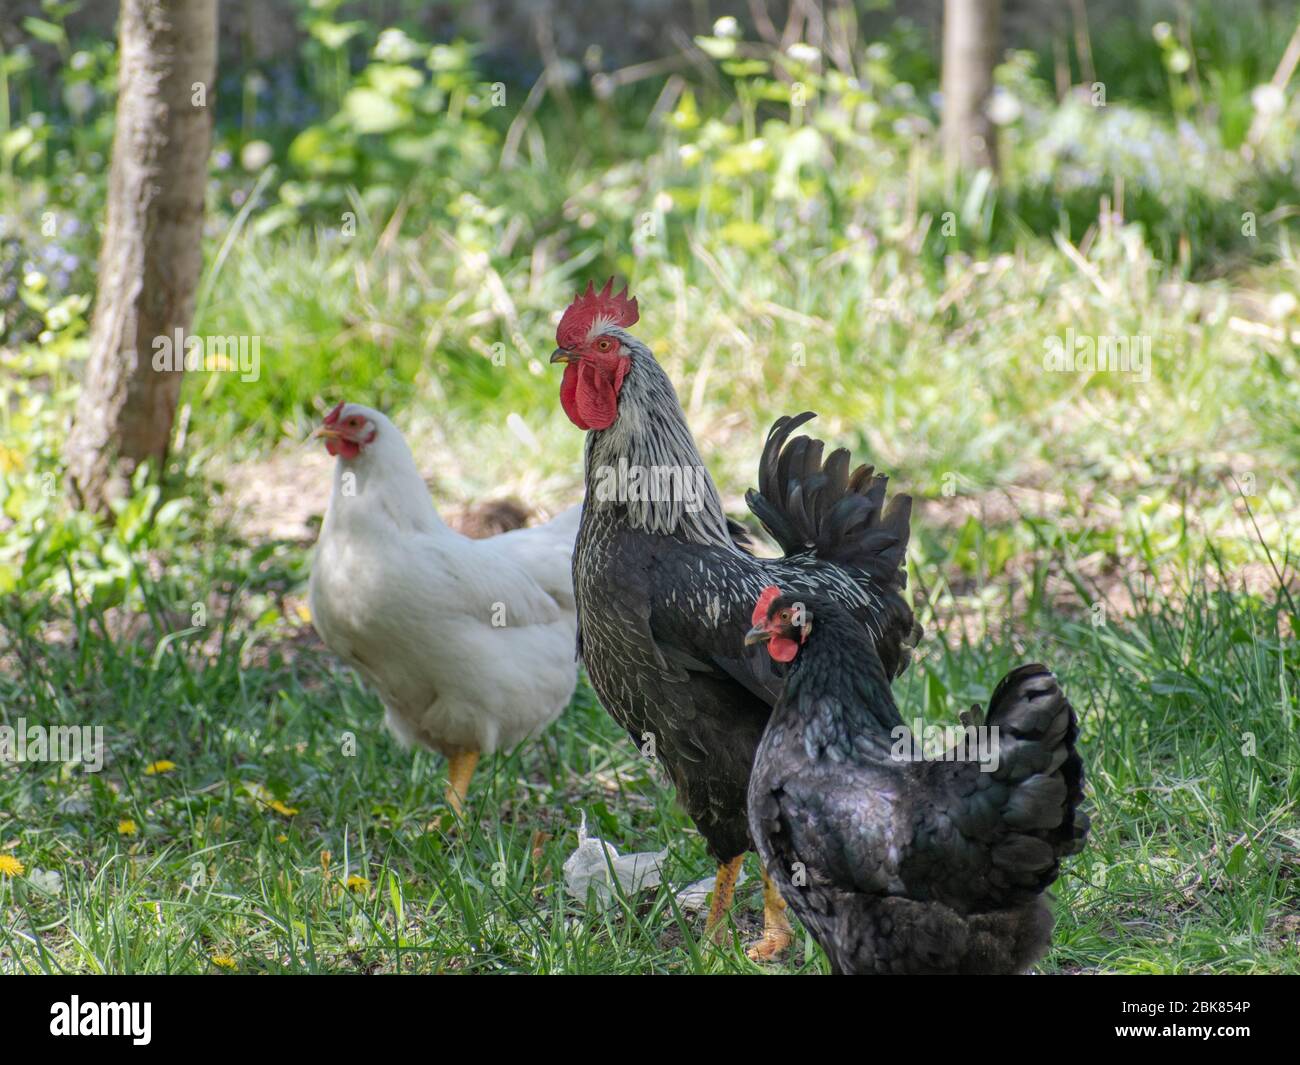 Rooster and hens on a farm, domestic fowl, Gallus gallus domesticus Stock Photo